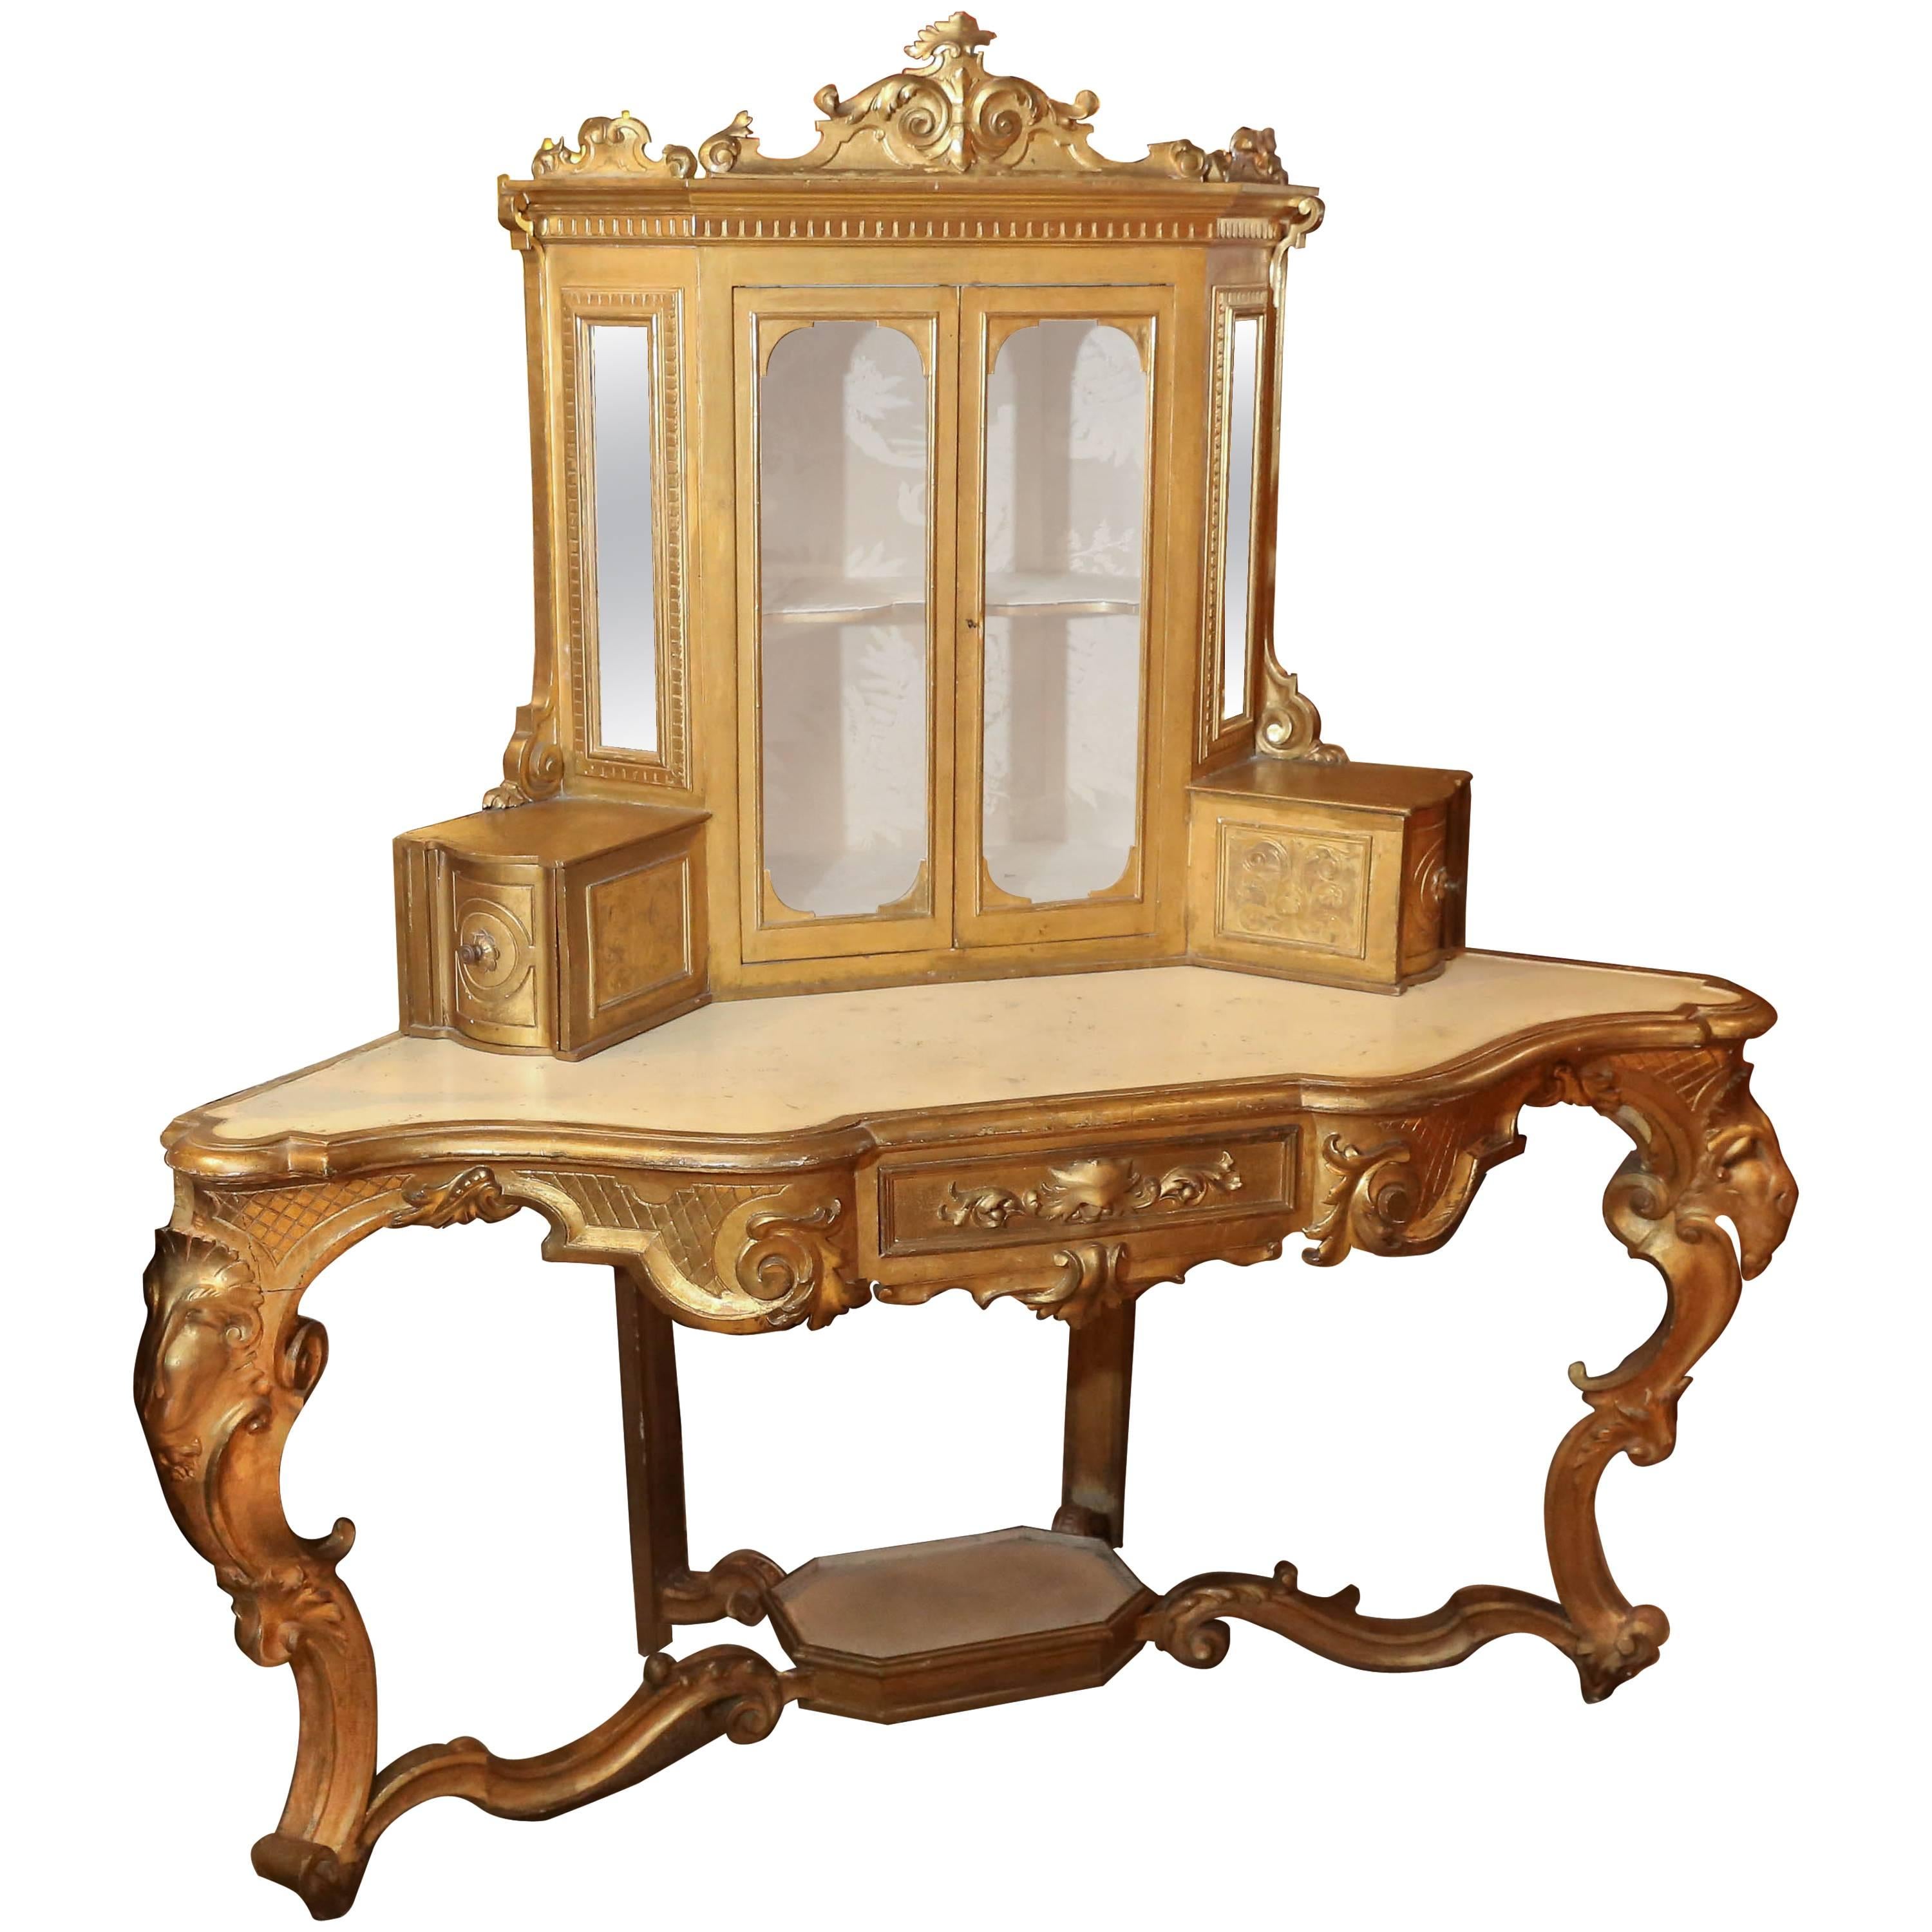 Giltwood Corner Console with  upper glass enclosed cabinet 19th Century, Italian